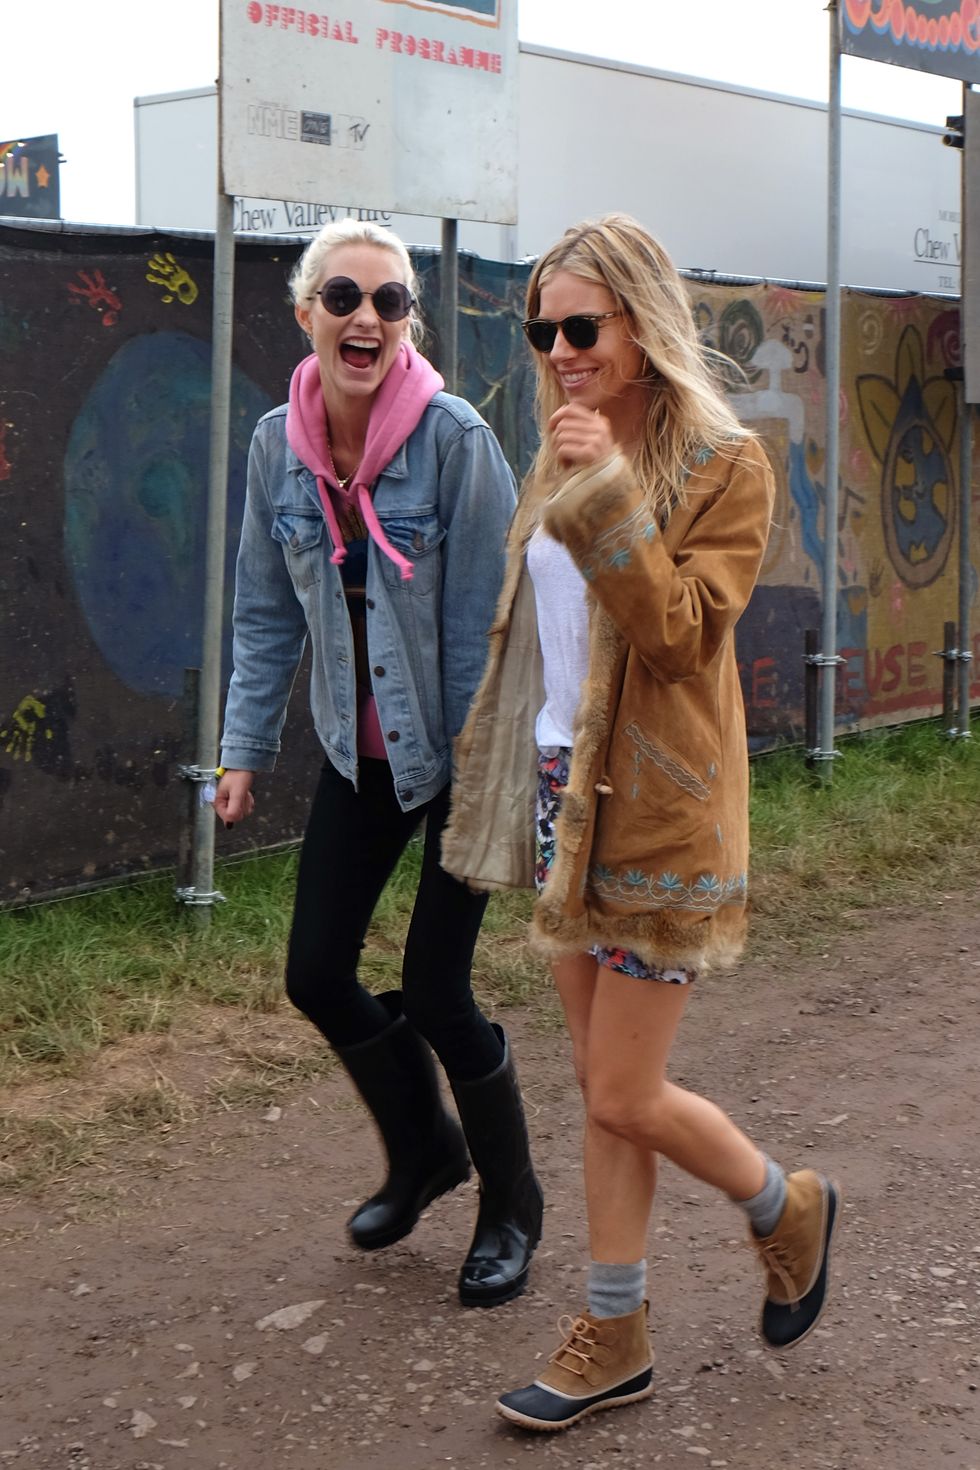 GLASTONBURY, ENGLAND - JUNE 24:  Poppy Delevingne (L) and Sienna Miller attend day 2 of the Glastonbury Festvial on June 24, 2017 in Glastonbury, England.  (Photo by Mark Boland#2017-2018/Getty Images)